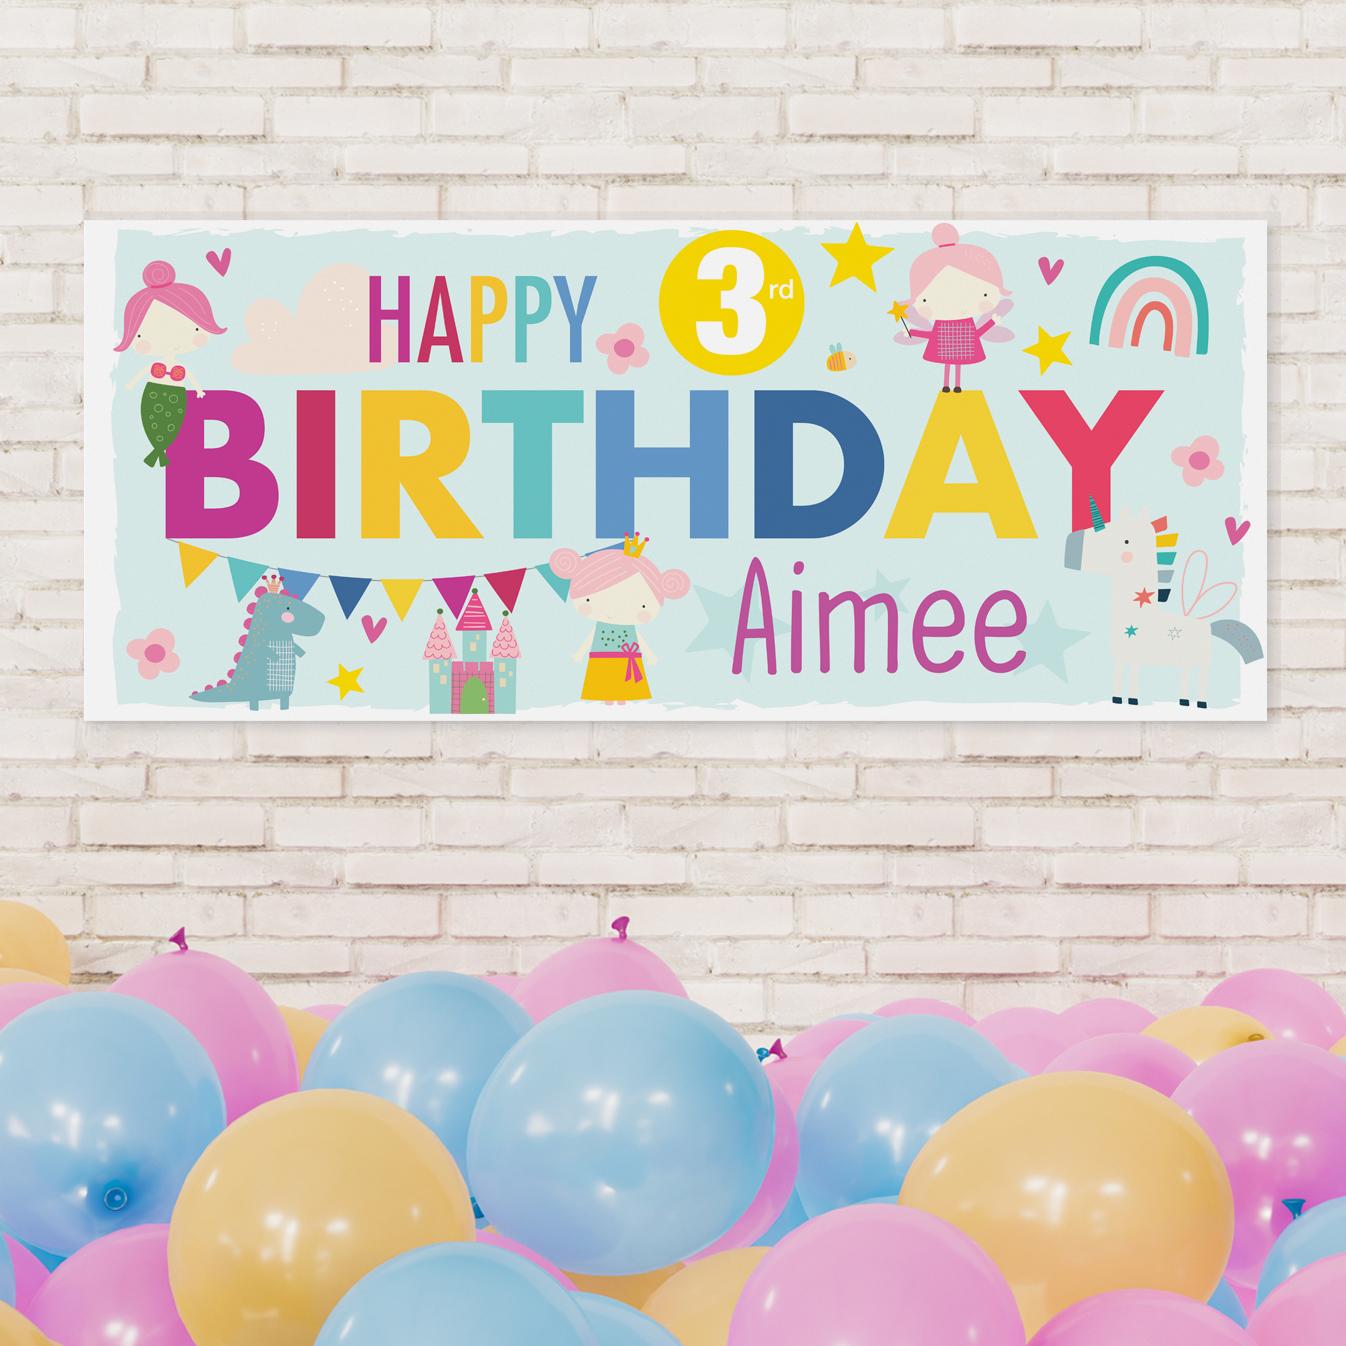 Unique birthday banners for girls by Frame My Name, bold and colourful with Happy Birthday